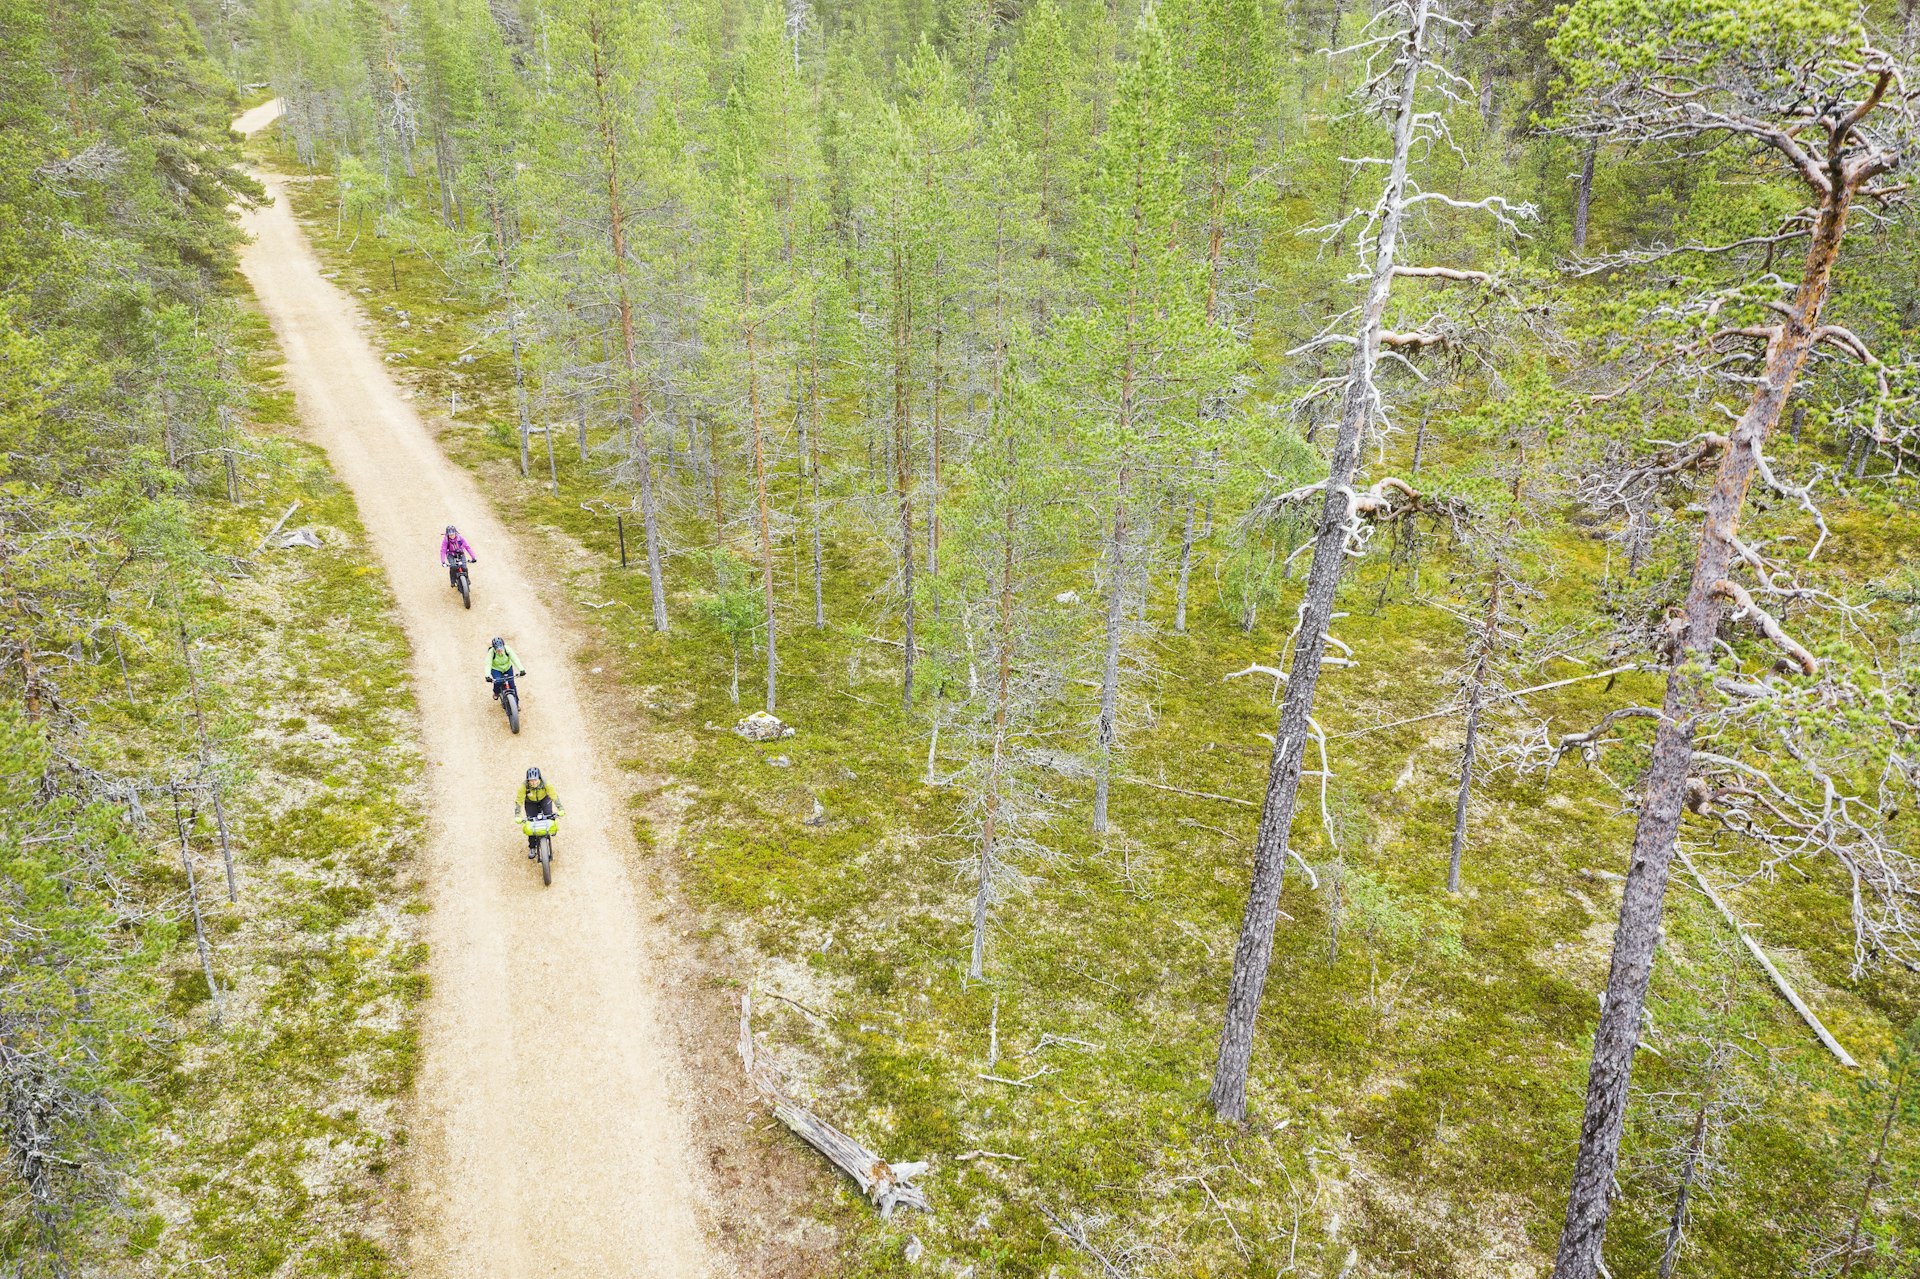 Aerial view of 3 cyclists on a path through the Urho Kekkonen National Park, Finland